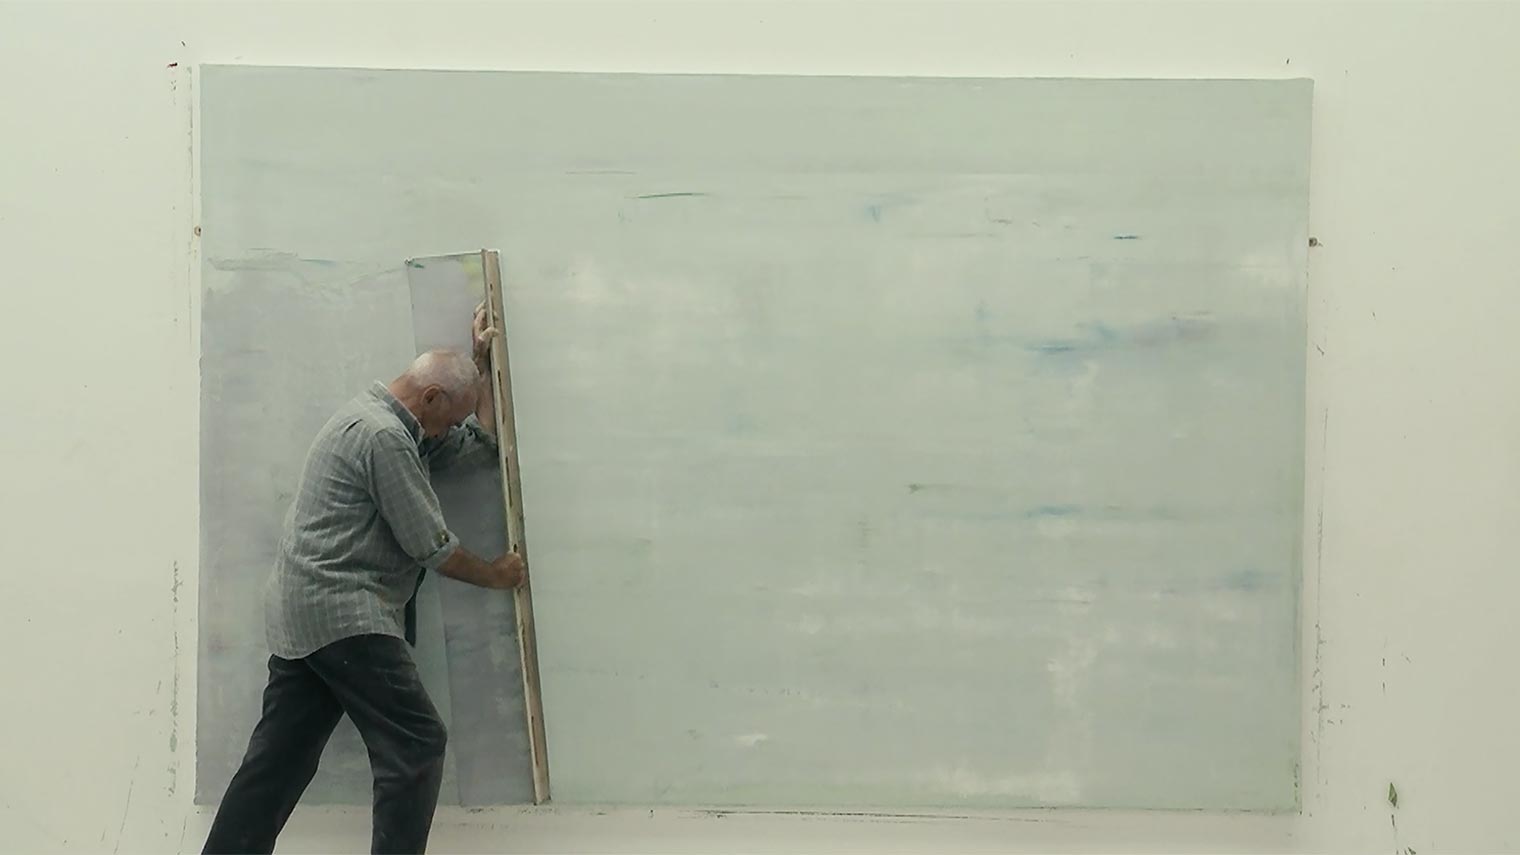 The artist Gerhard Richter draws a large squeegee across a white canvas